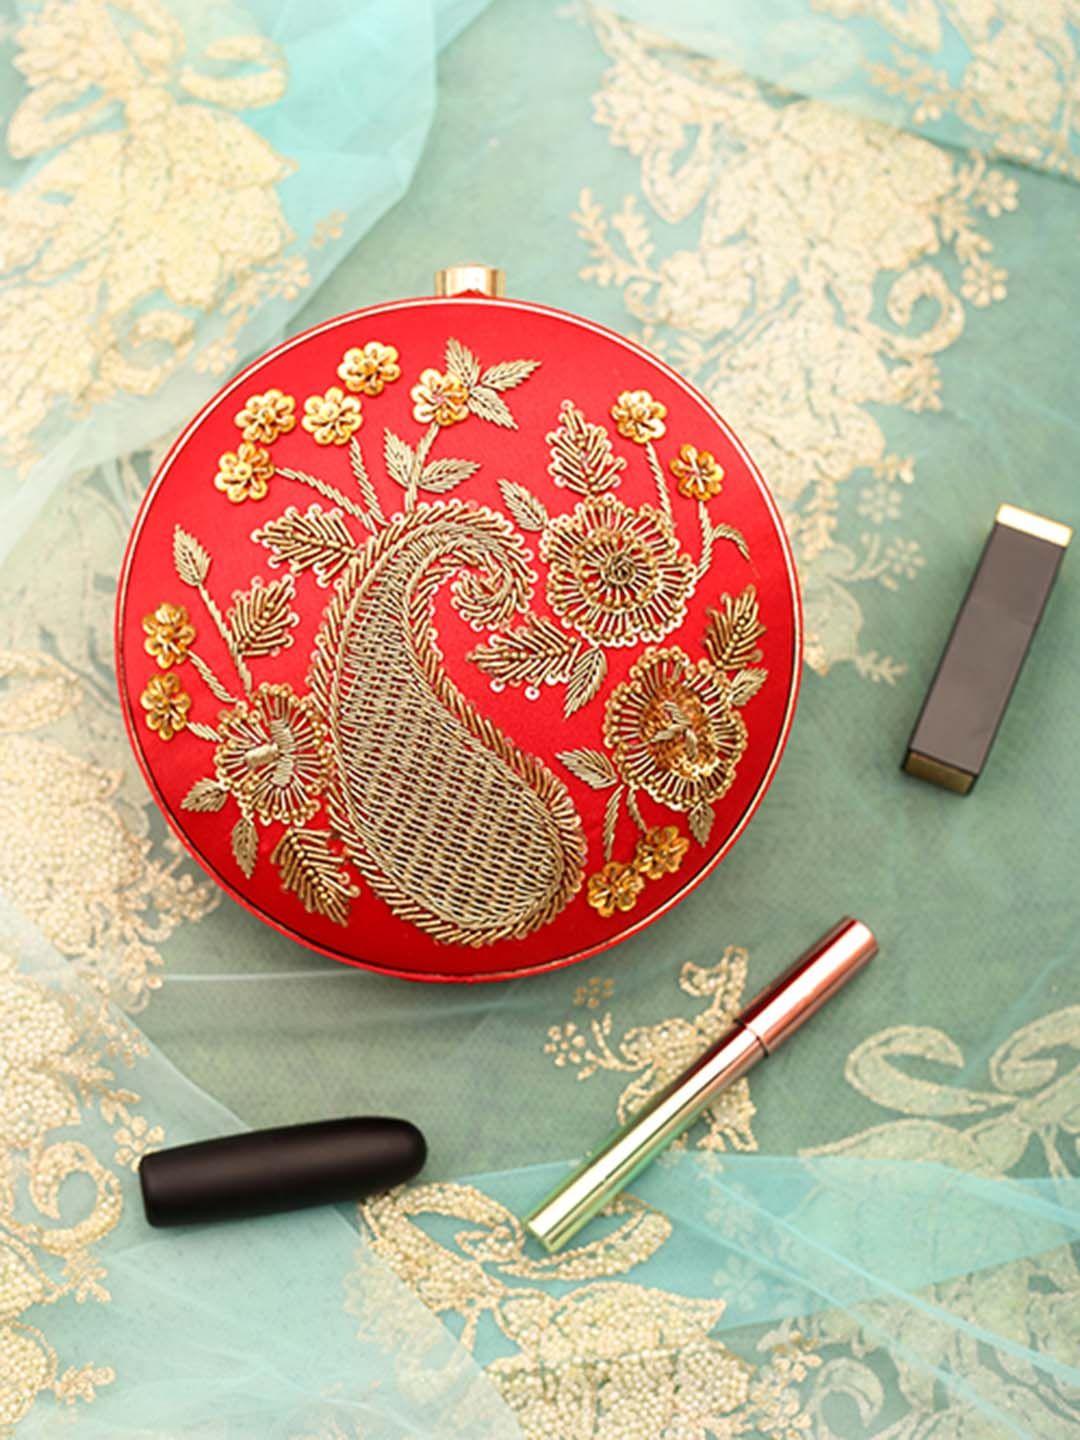 angeline red & gold-toned embroidery embellished clutch